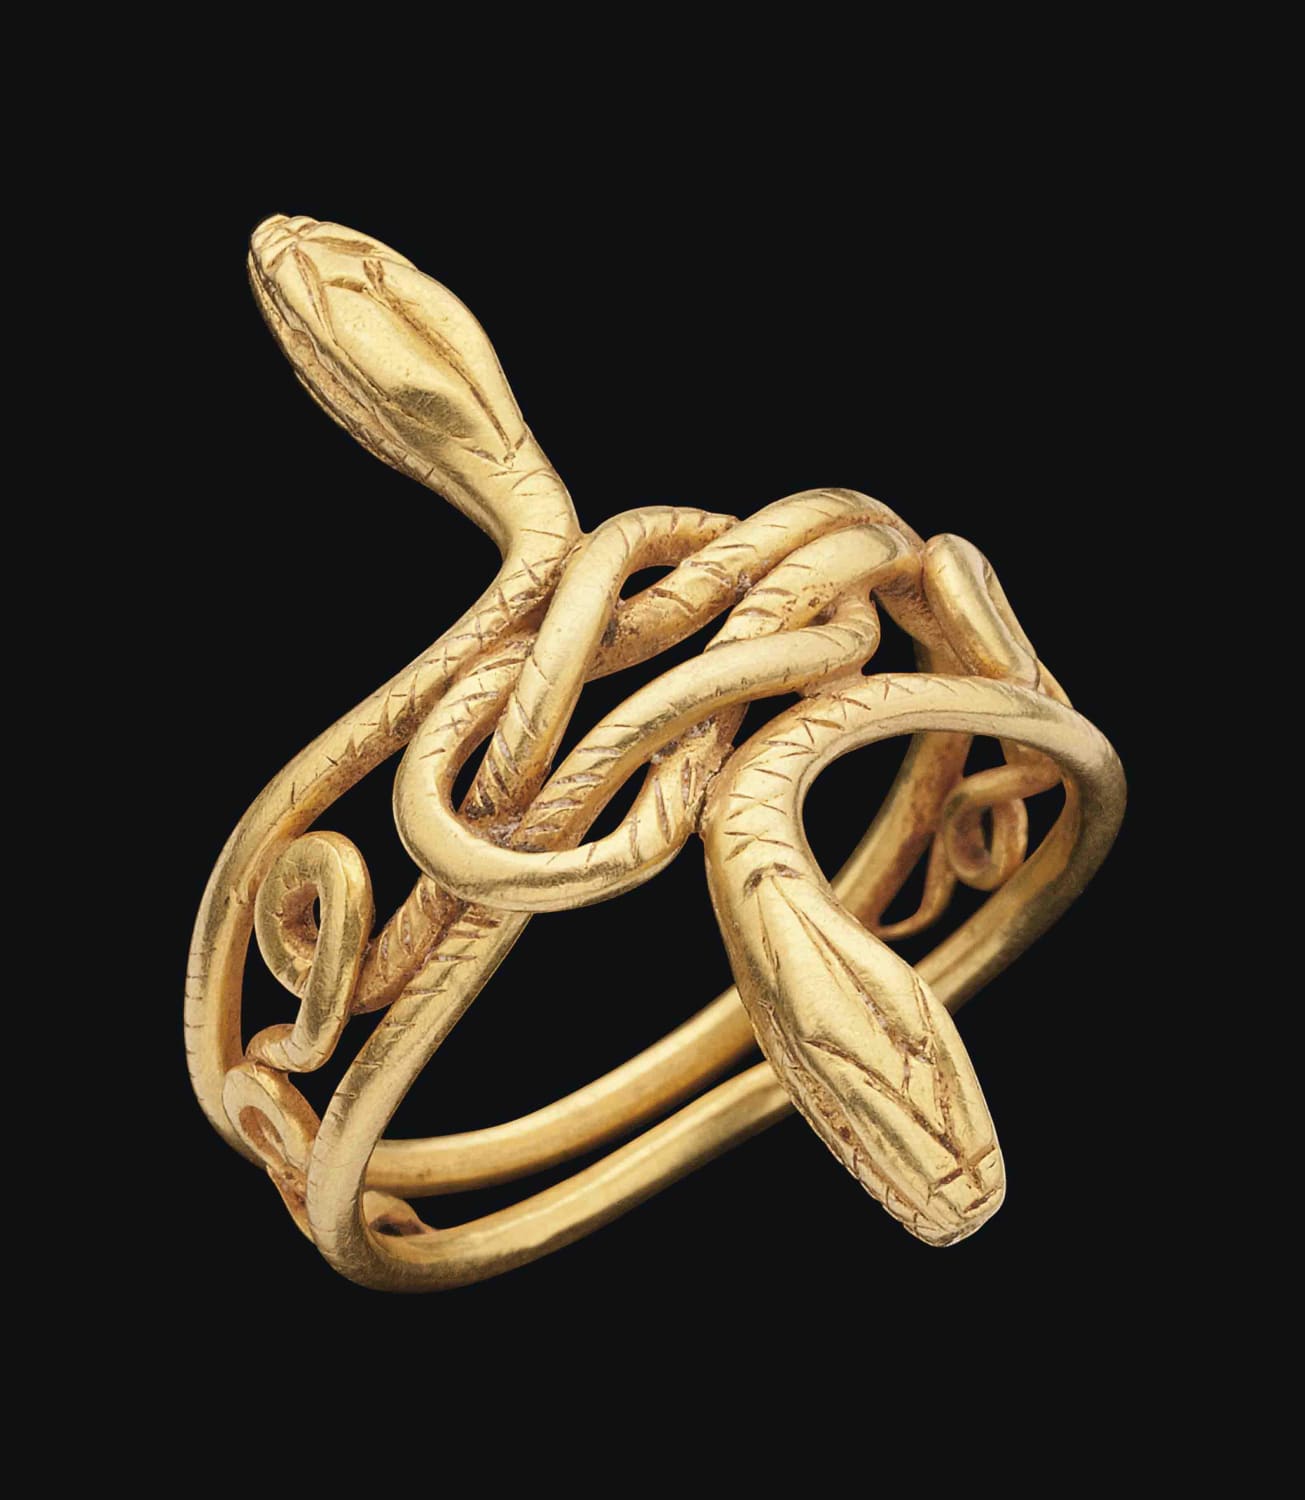 A greaco-roman gold snake ring, circa 1st century BC-1st century AD, sold at christie's in 2011